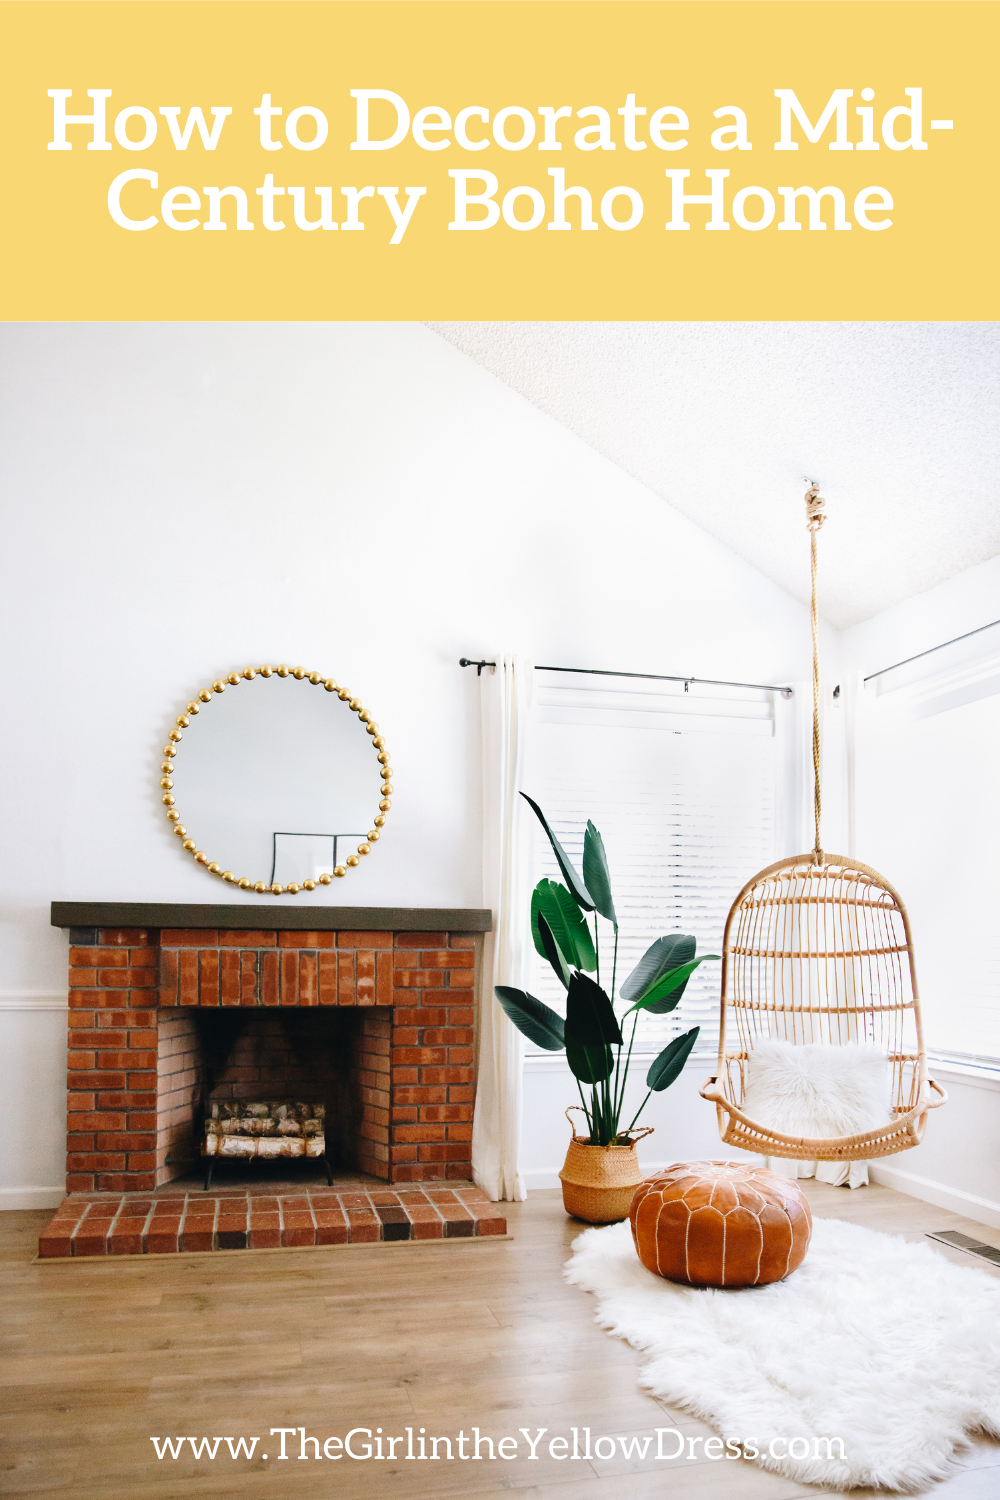 how to decorate a home you'll love. www.thegirlintheyellowdress.com